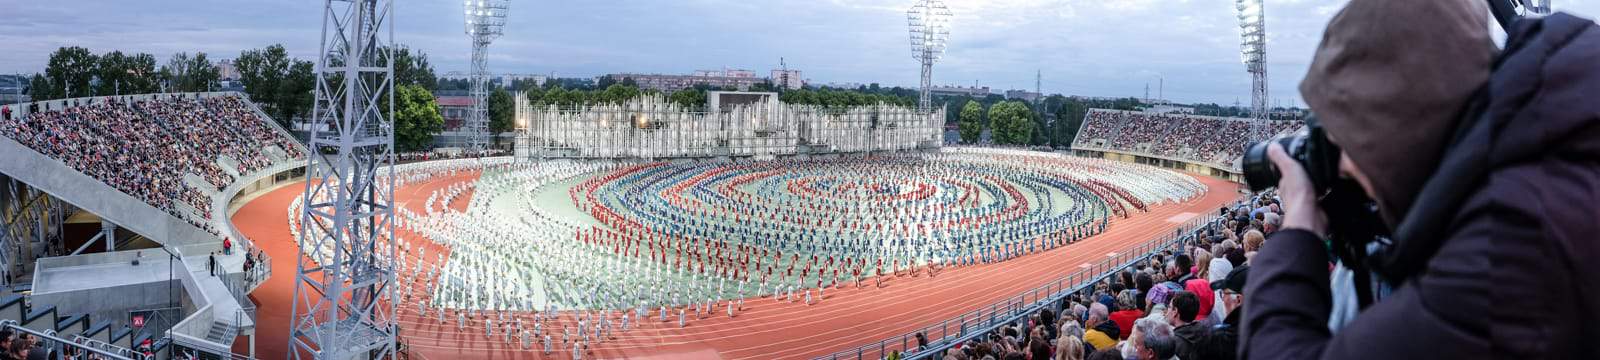 The opening show of the Latvia Song and Dance Celebration at the Daugava Stadium in Riga